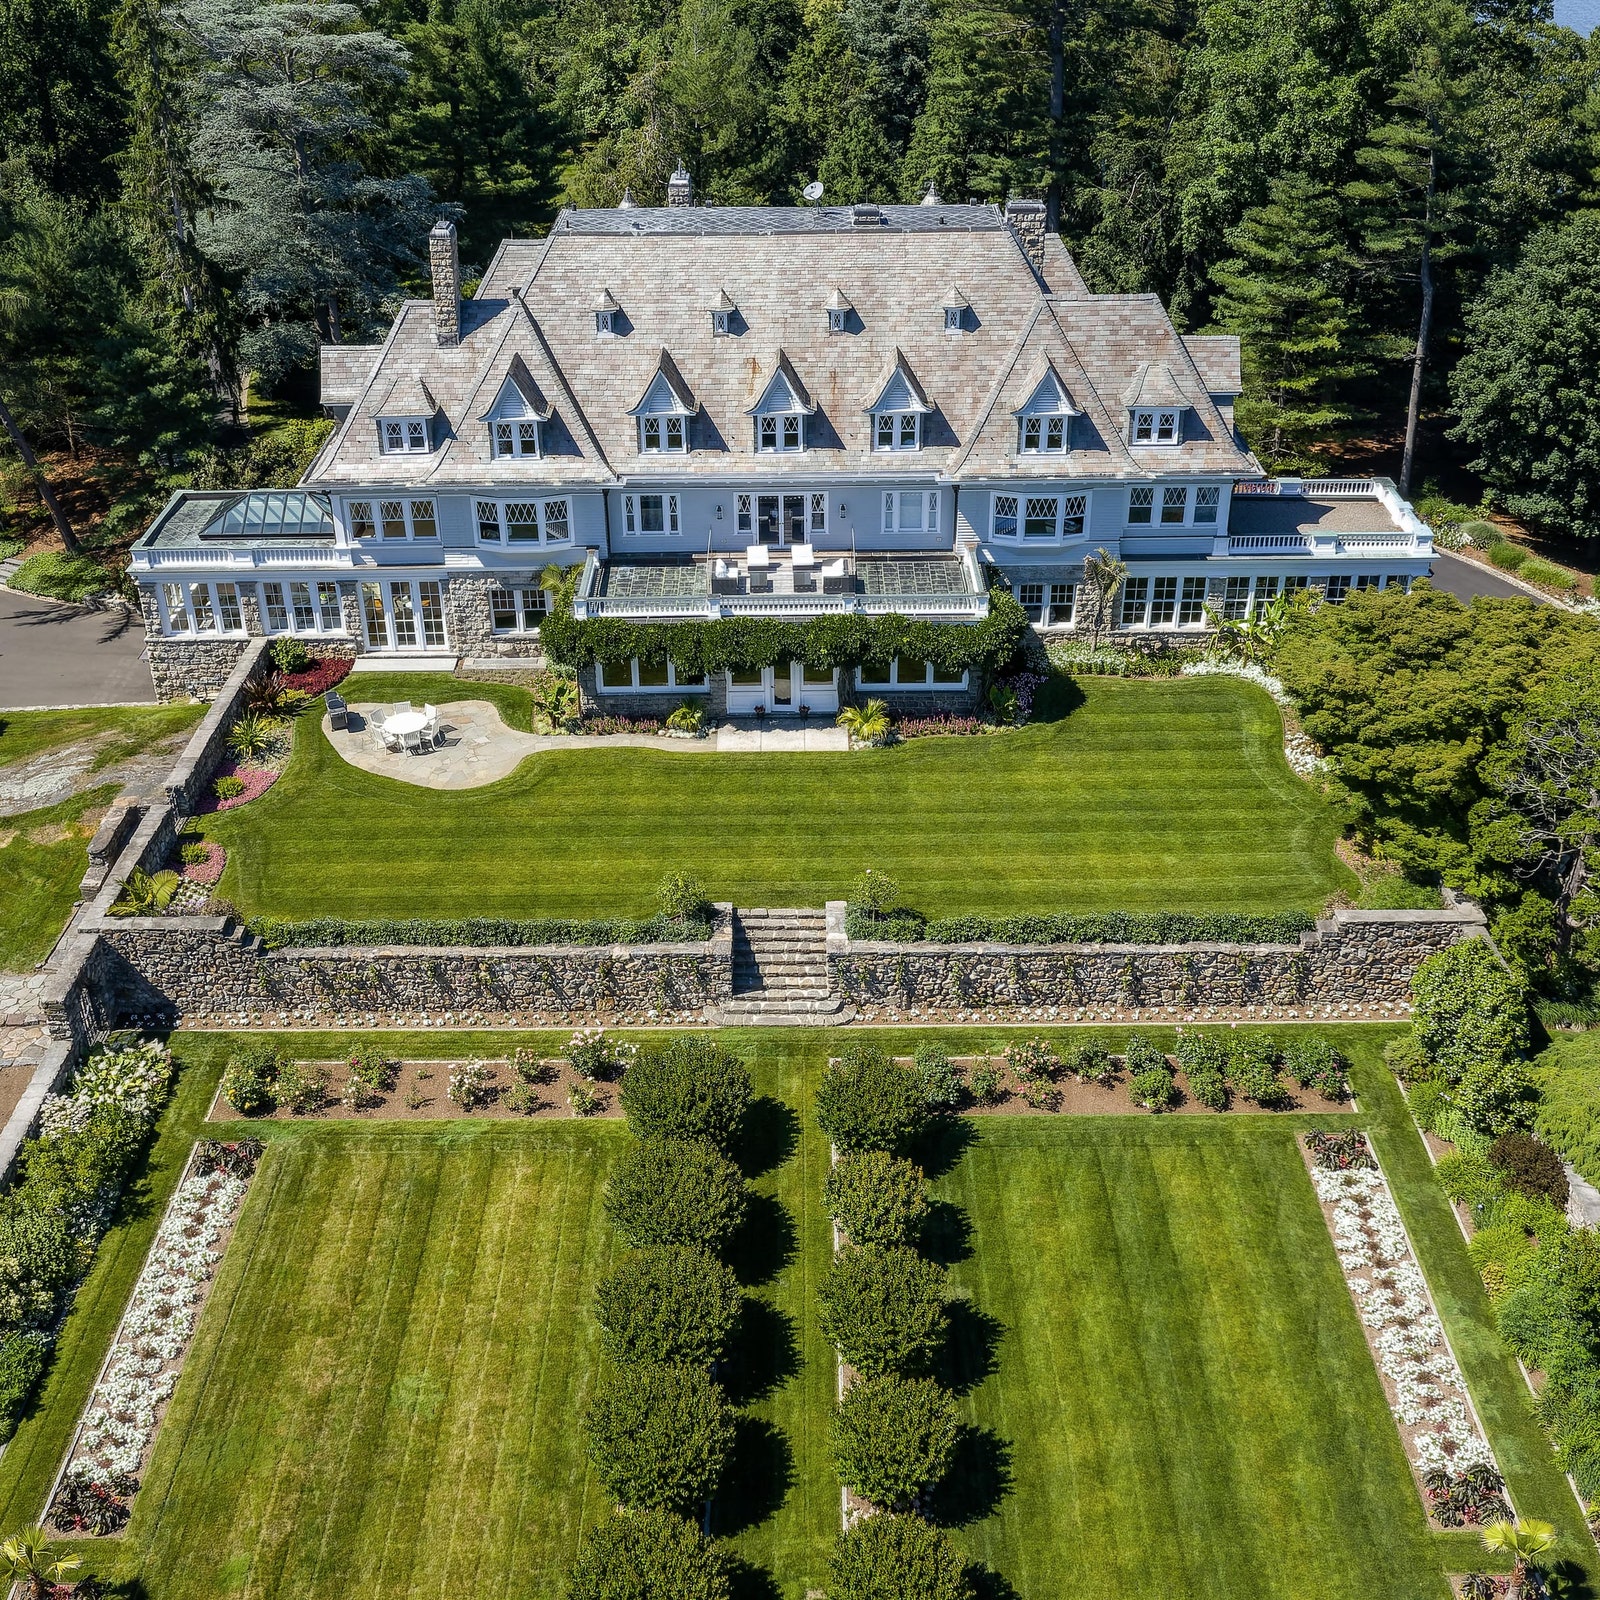 The Most Expensive Home In Connecticut History Just Sold&-and the Price is Shocking